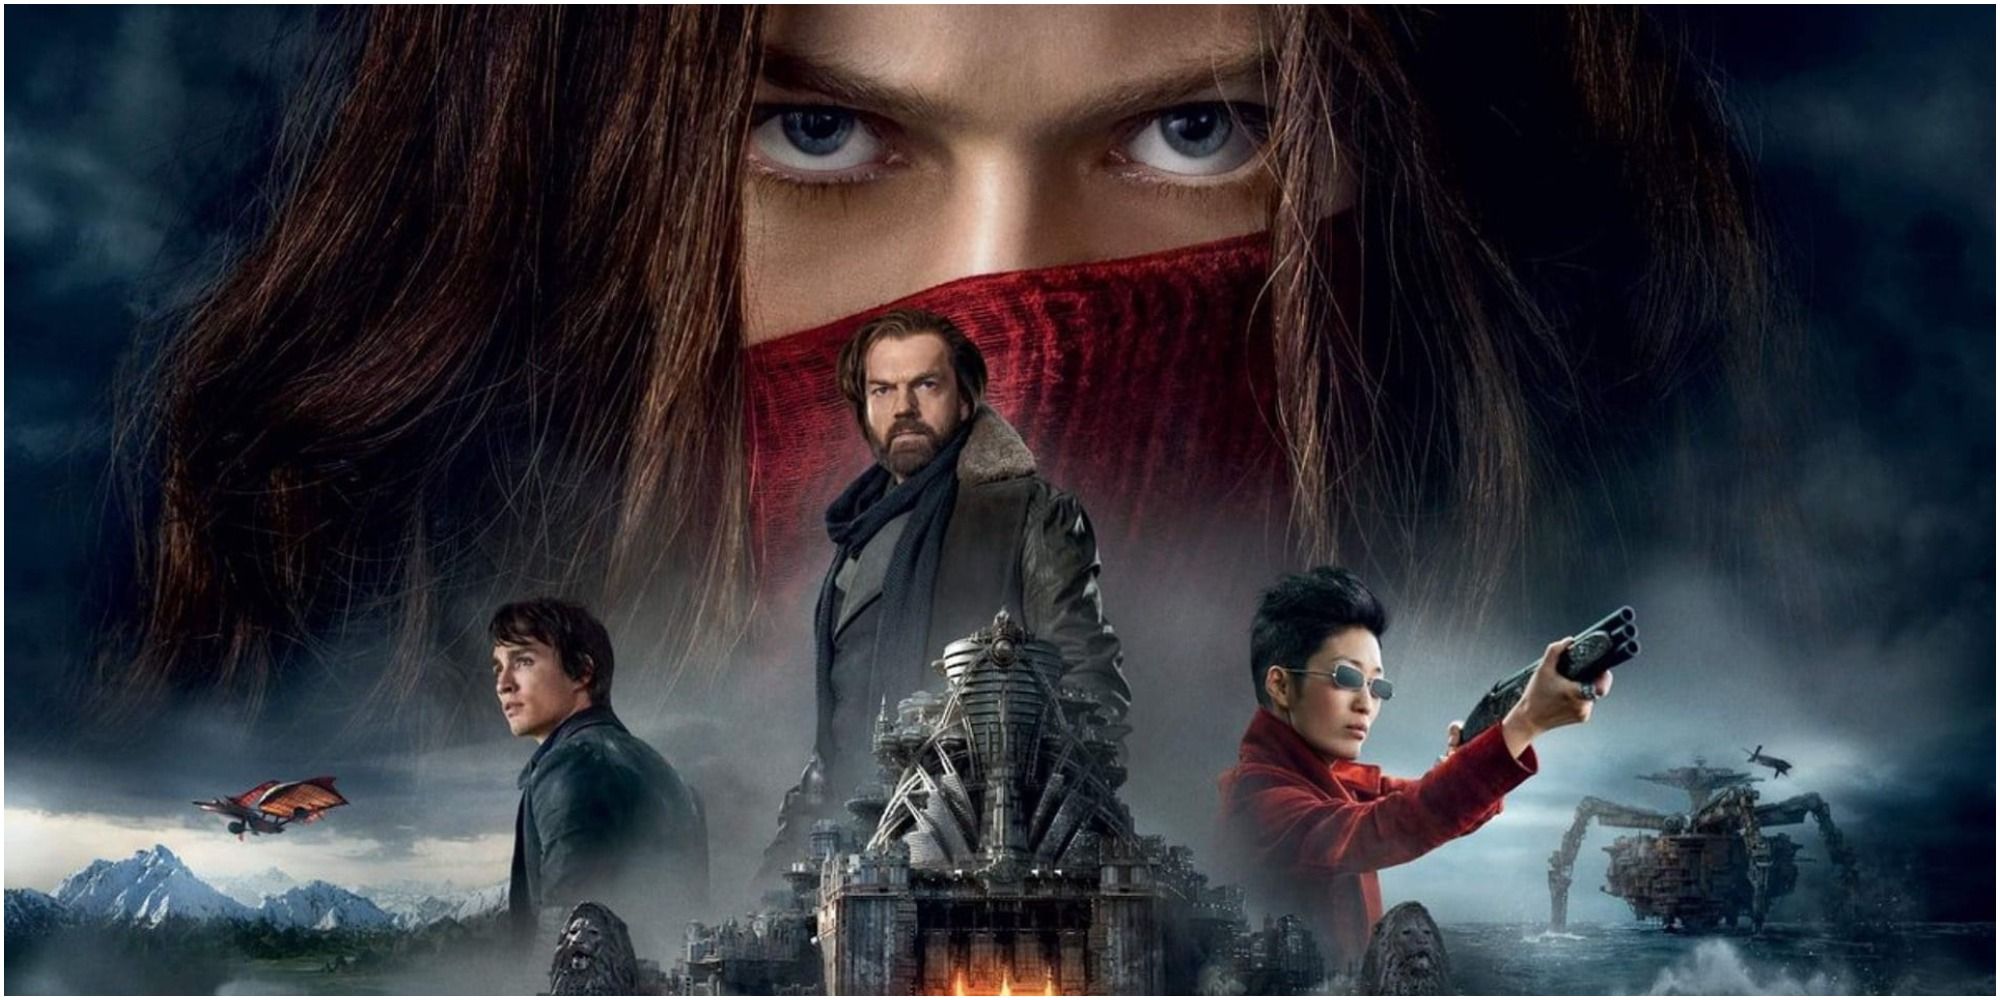 Cropped poster for Mortal Engines